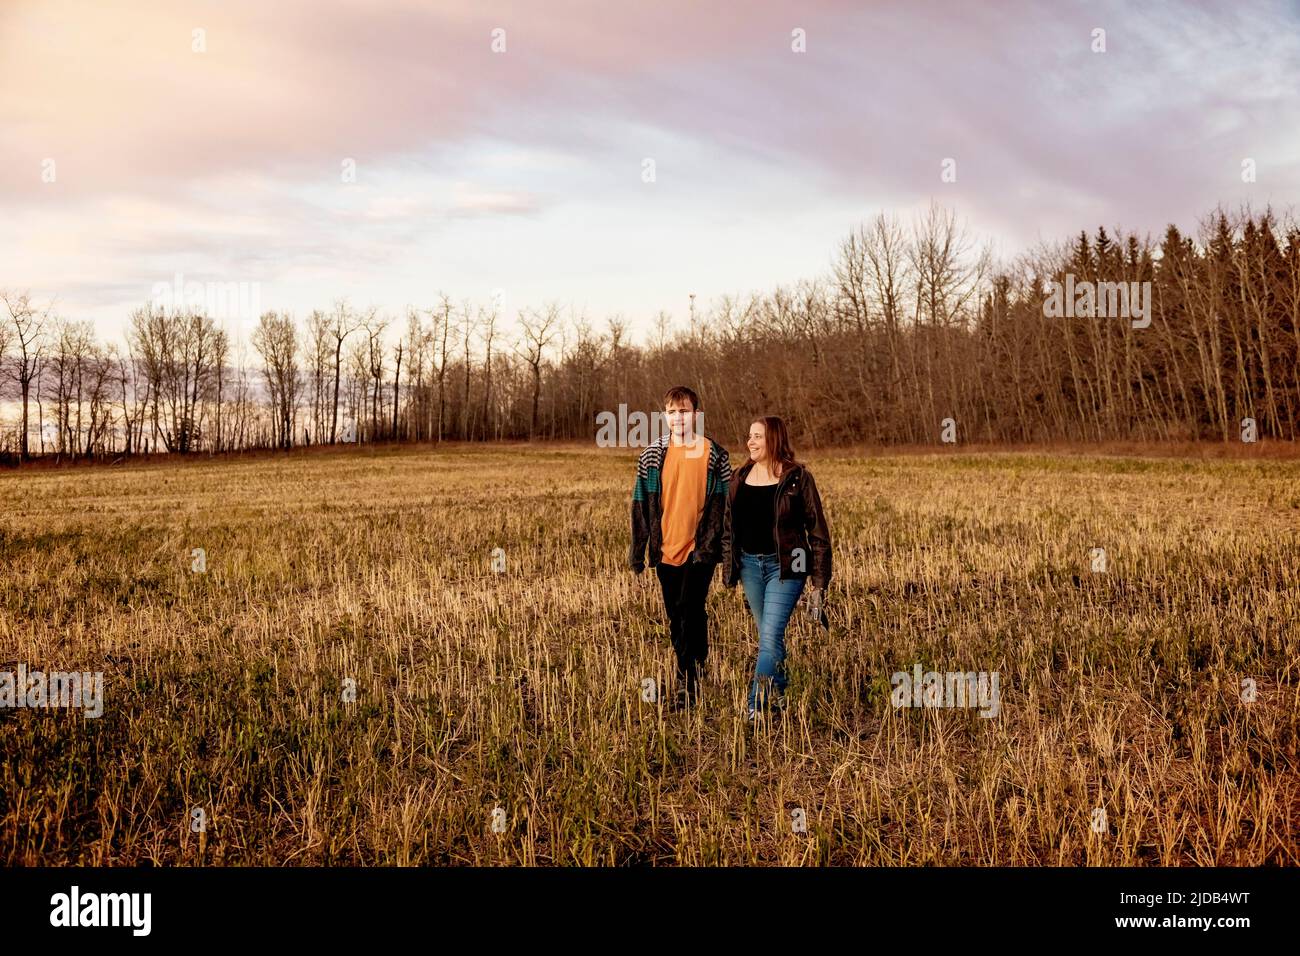 A mother with Epilepsy spending quality time outdoors with her son, who has Asperger Syndrome; Westlock, Alberta, Canada Stock Photo